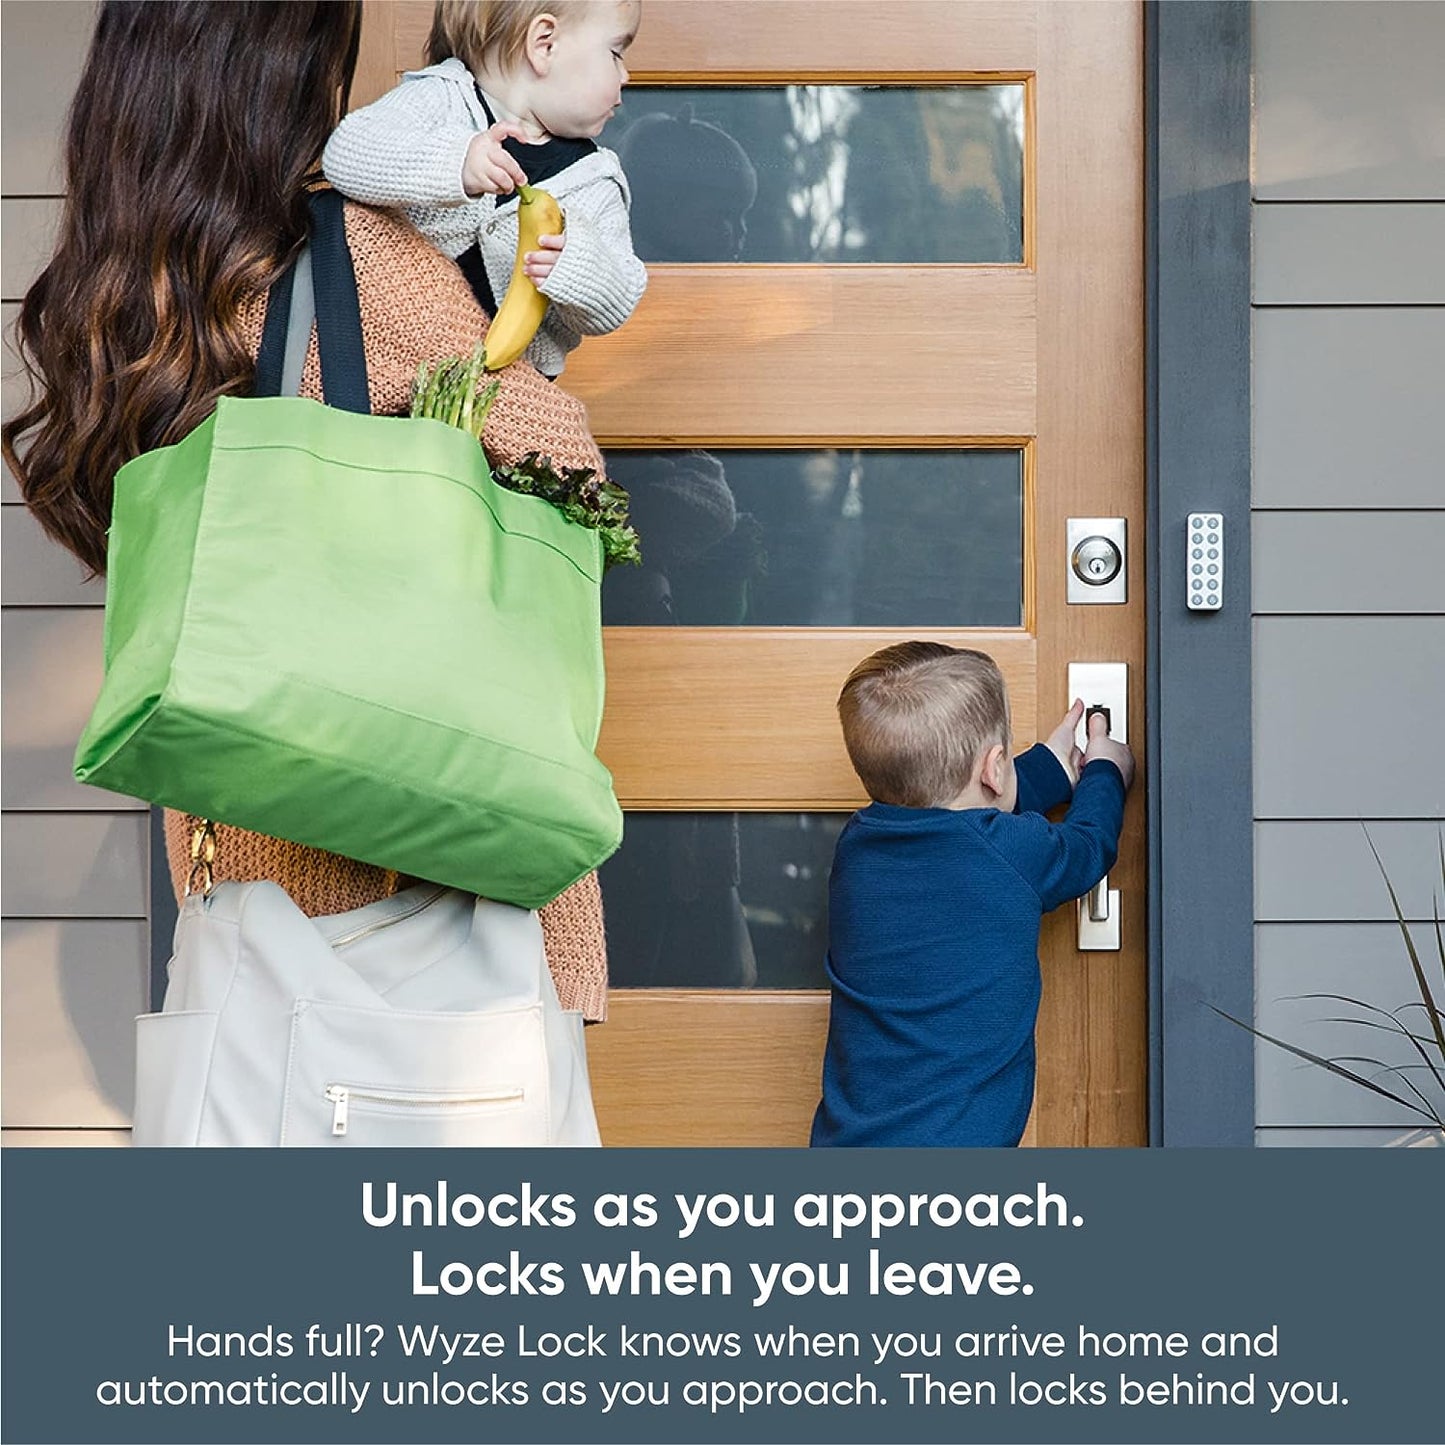 Unlocks as you approach and locks when you leave. Wyze smart lock solutions for aging in place | AskSAMIE